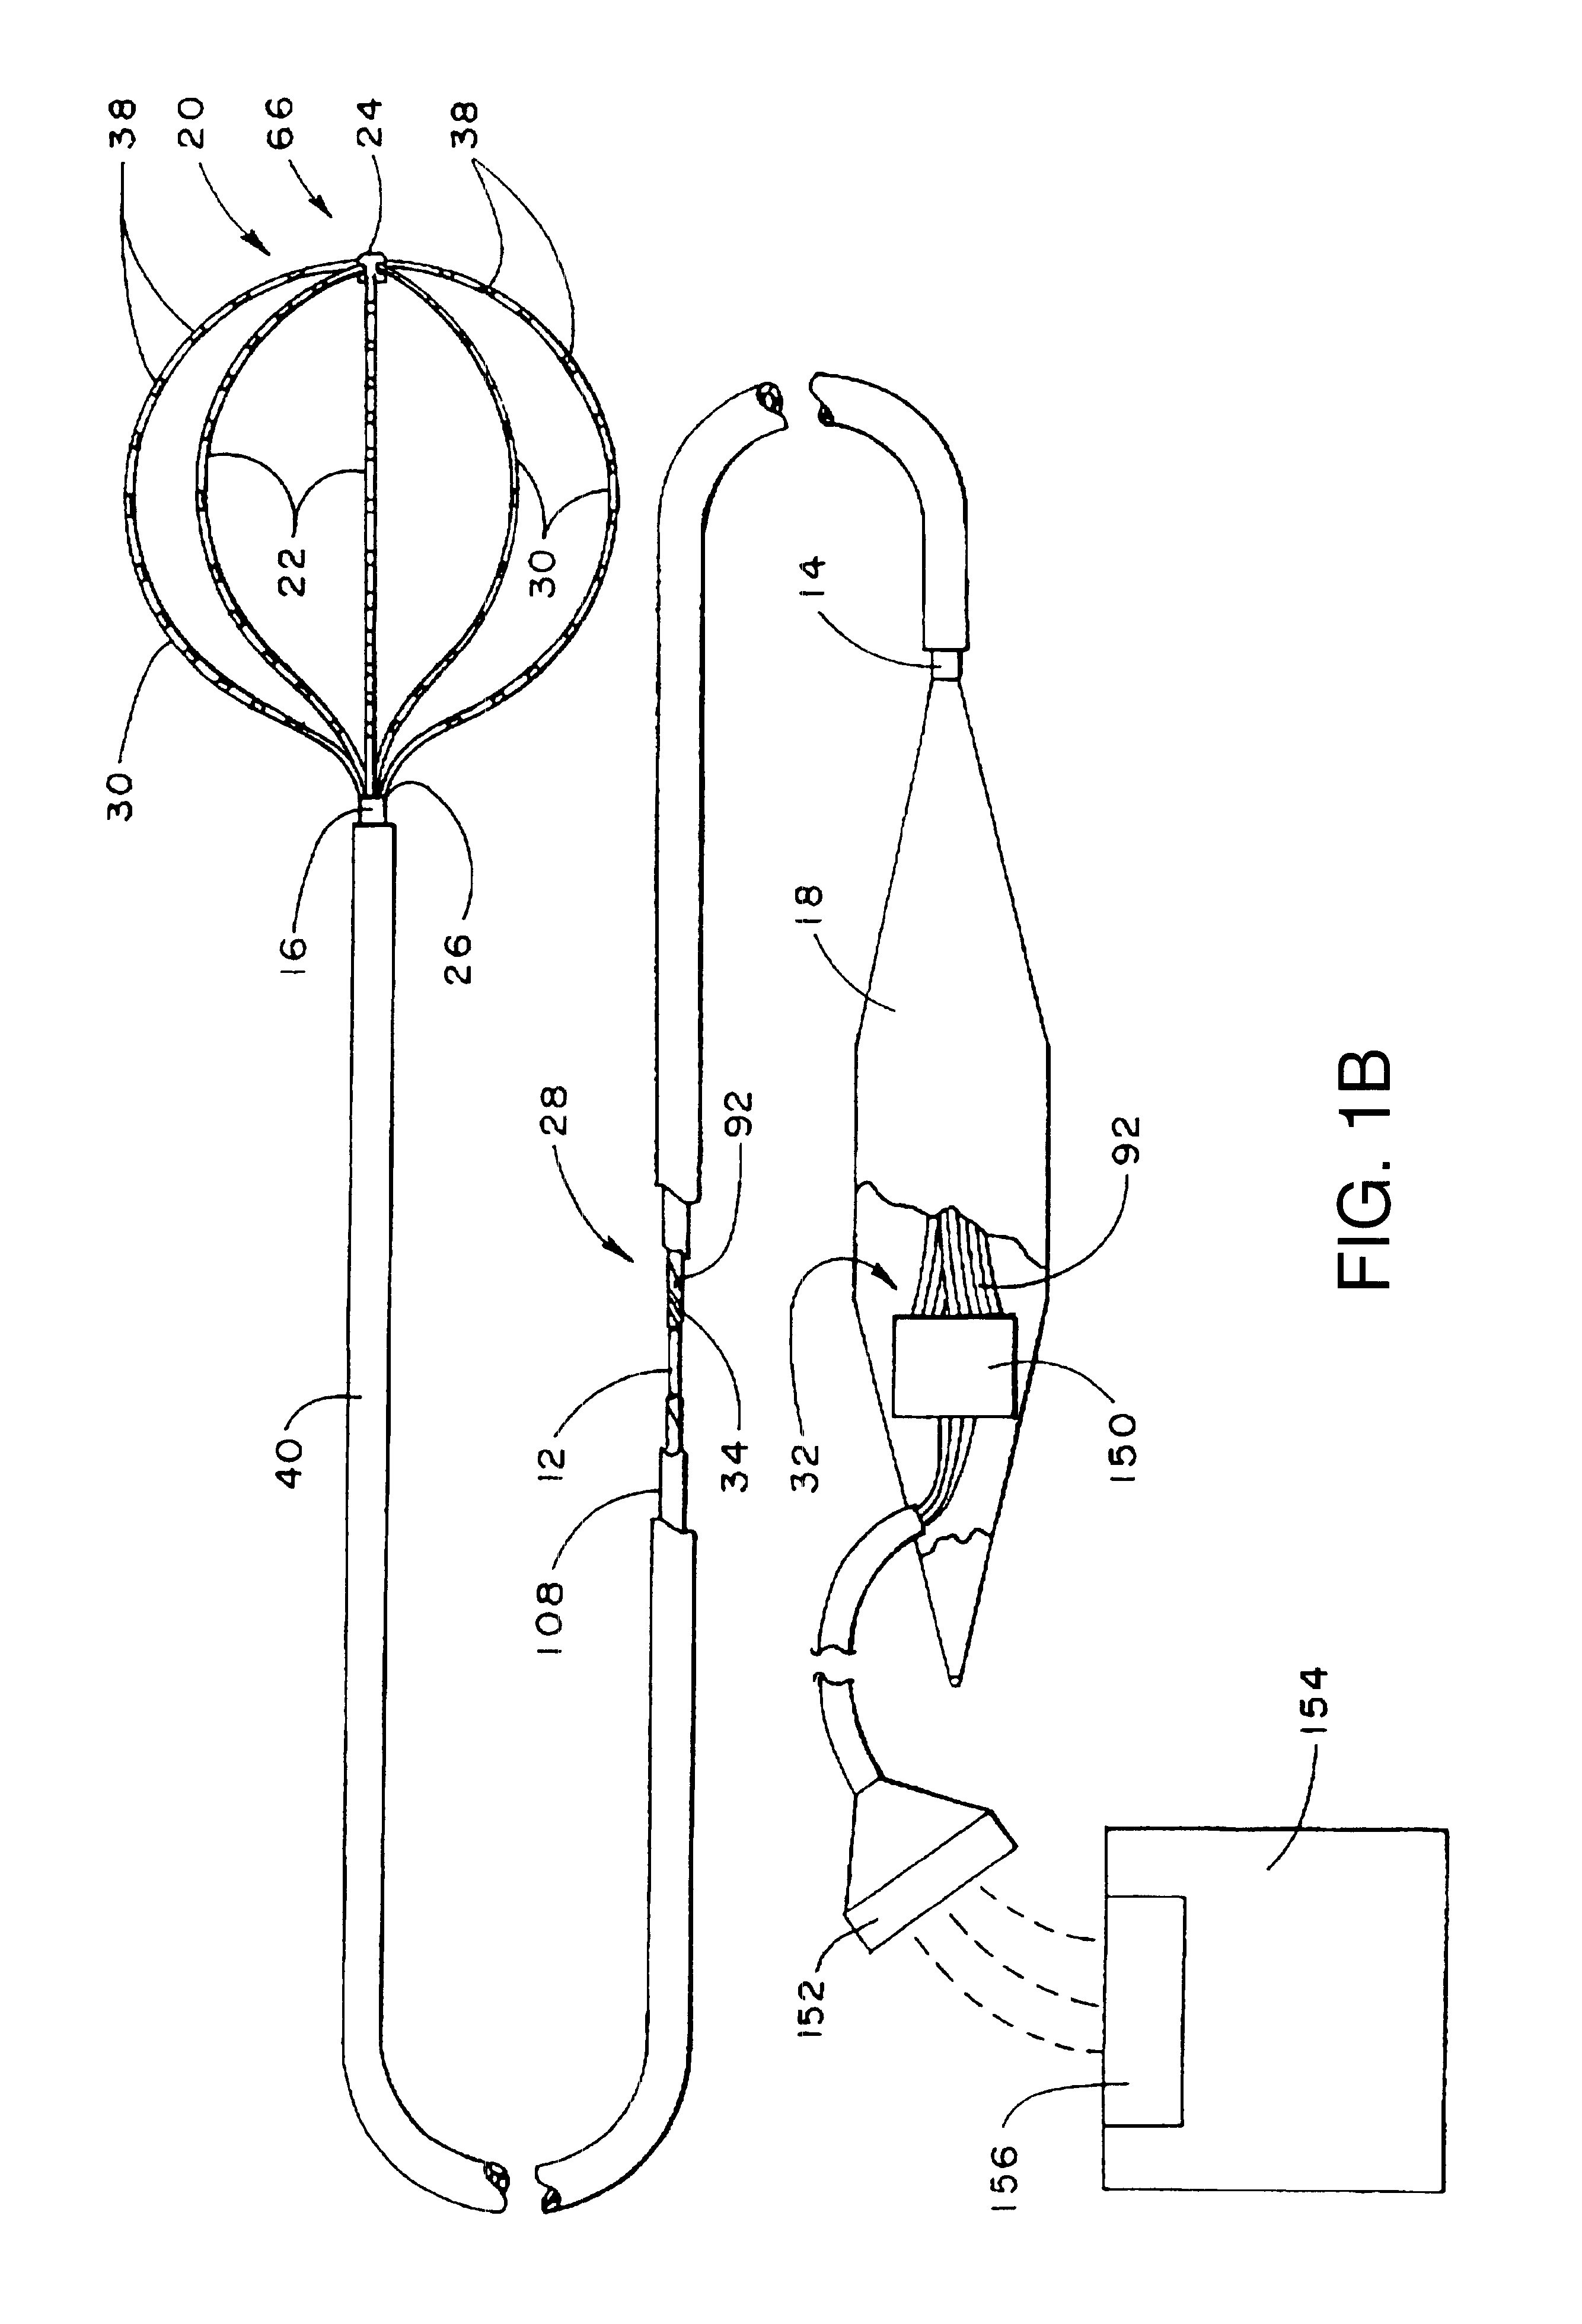 Medical device with three dimensional collapsible basket structure